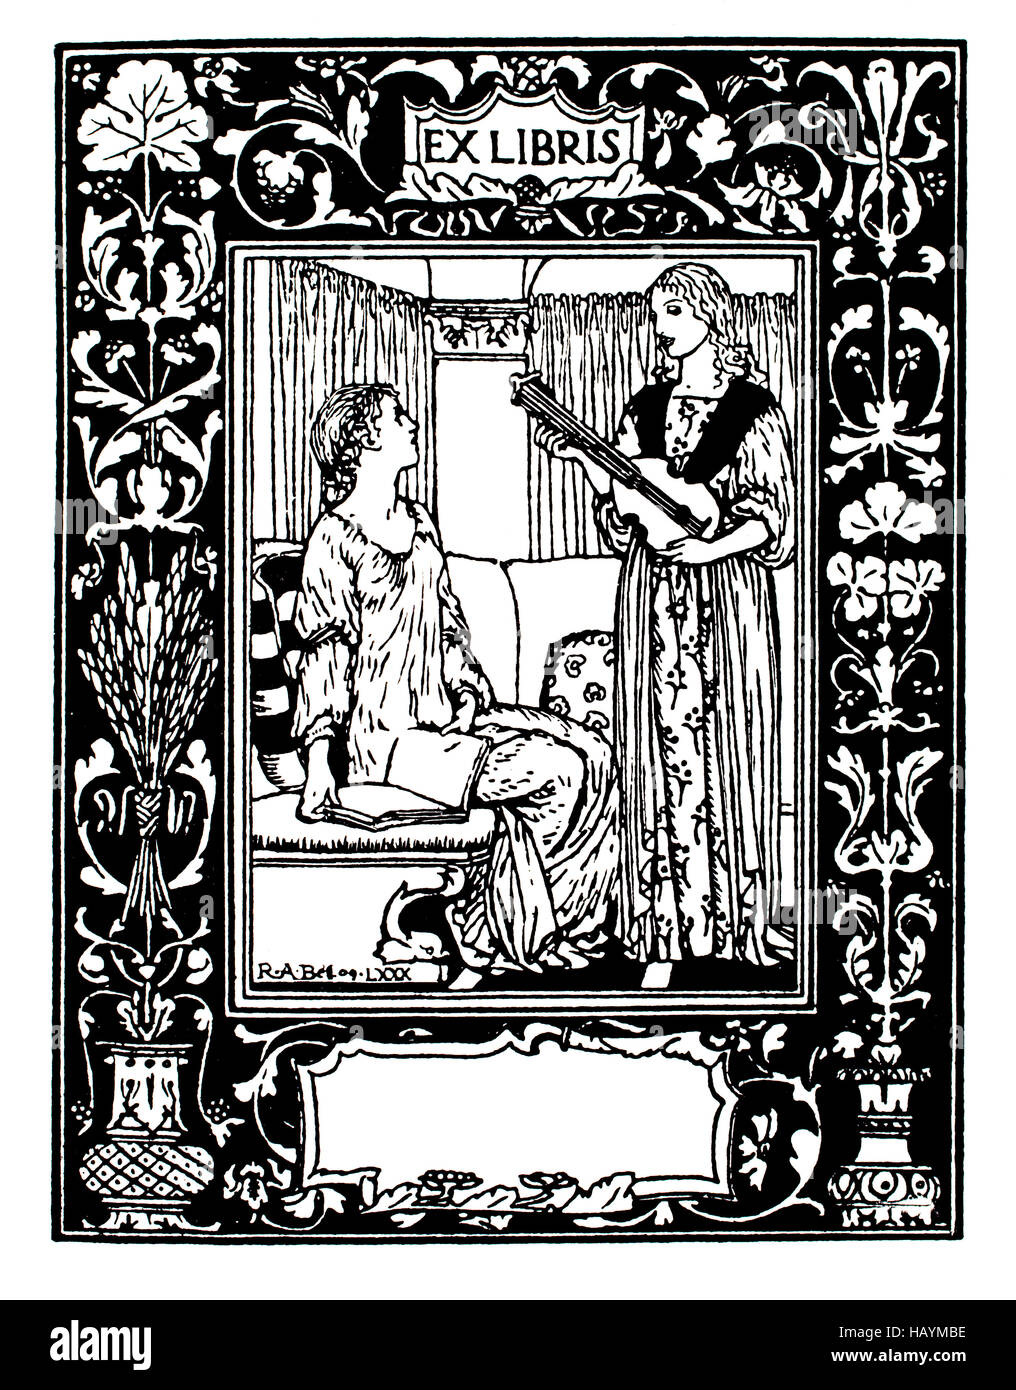 Ex libris bookplate Cut Out Stock Images & Pictures - Alamy